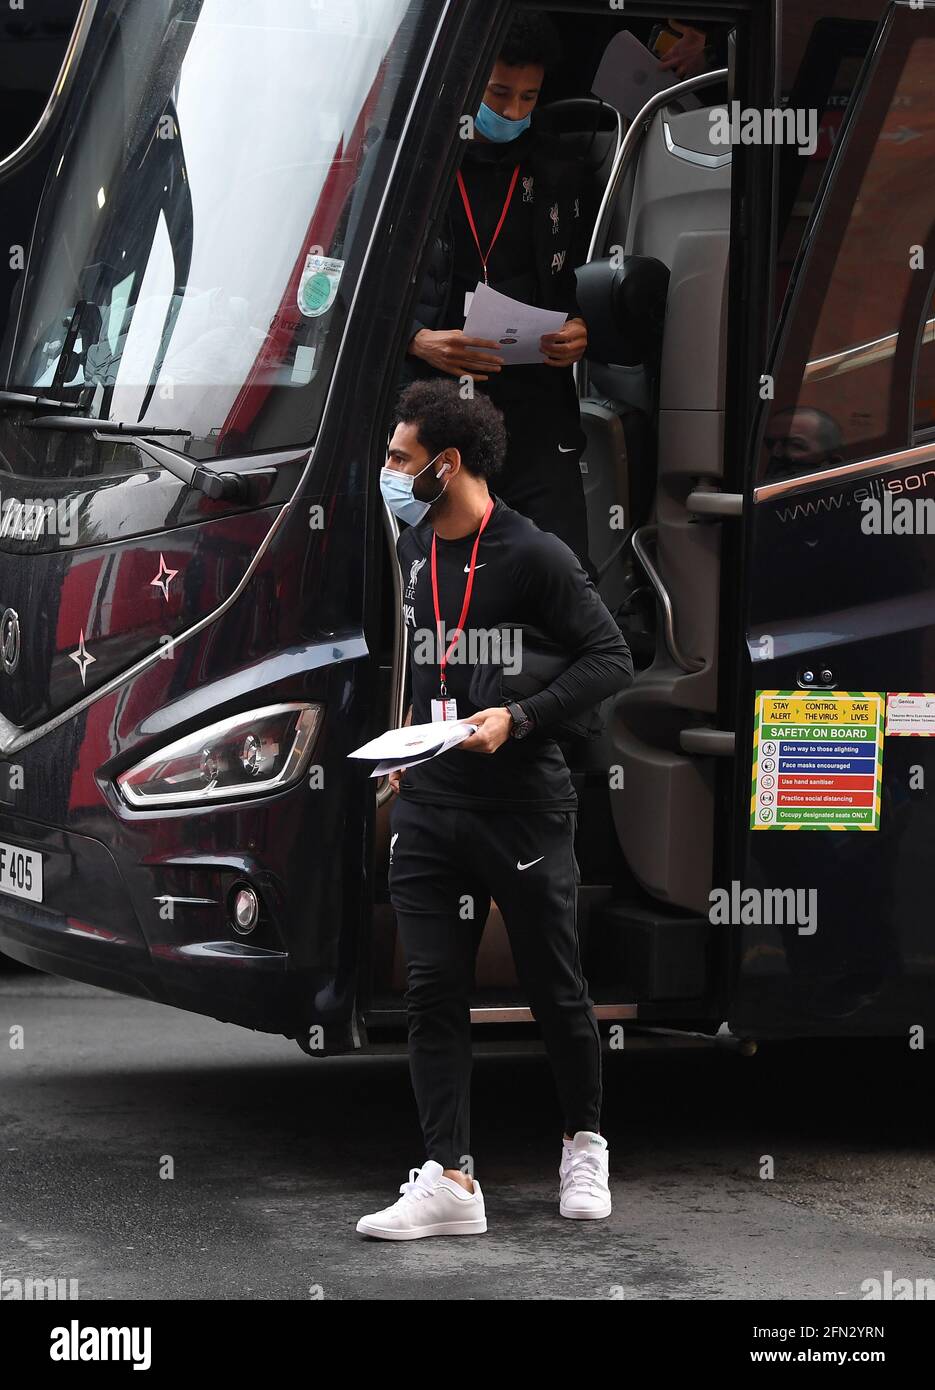 Liverpool's Mohamed Salah disembarks the team bus after arriving at the ground before the Premier League match at Old Trafford, Manchester. Picture date: Thursday May 13, 2021. Stock Photo